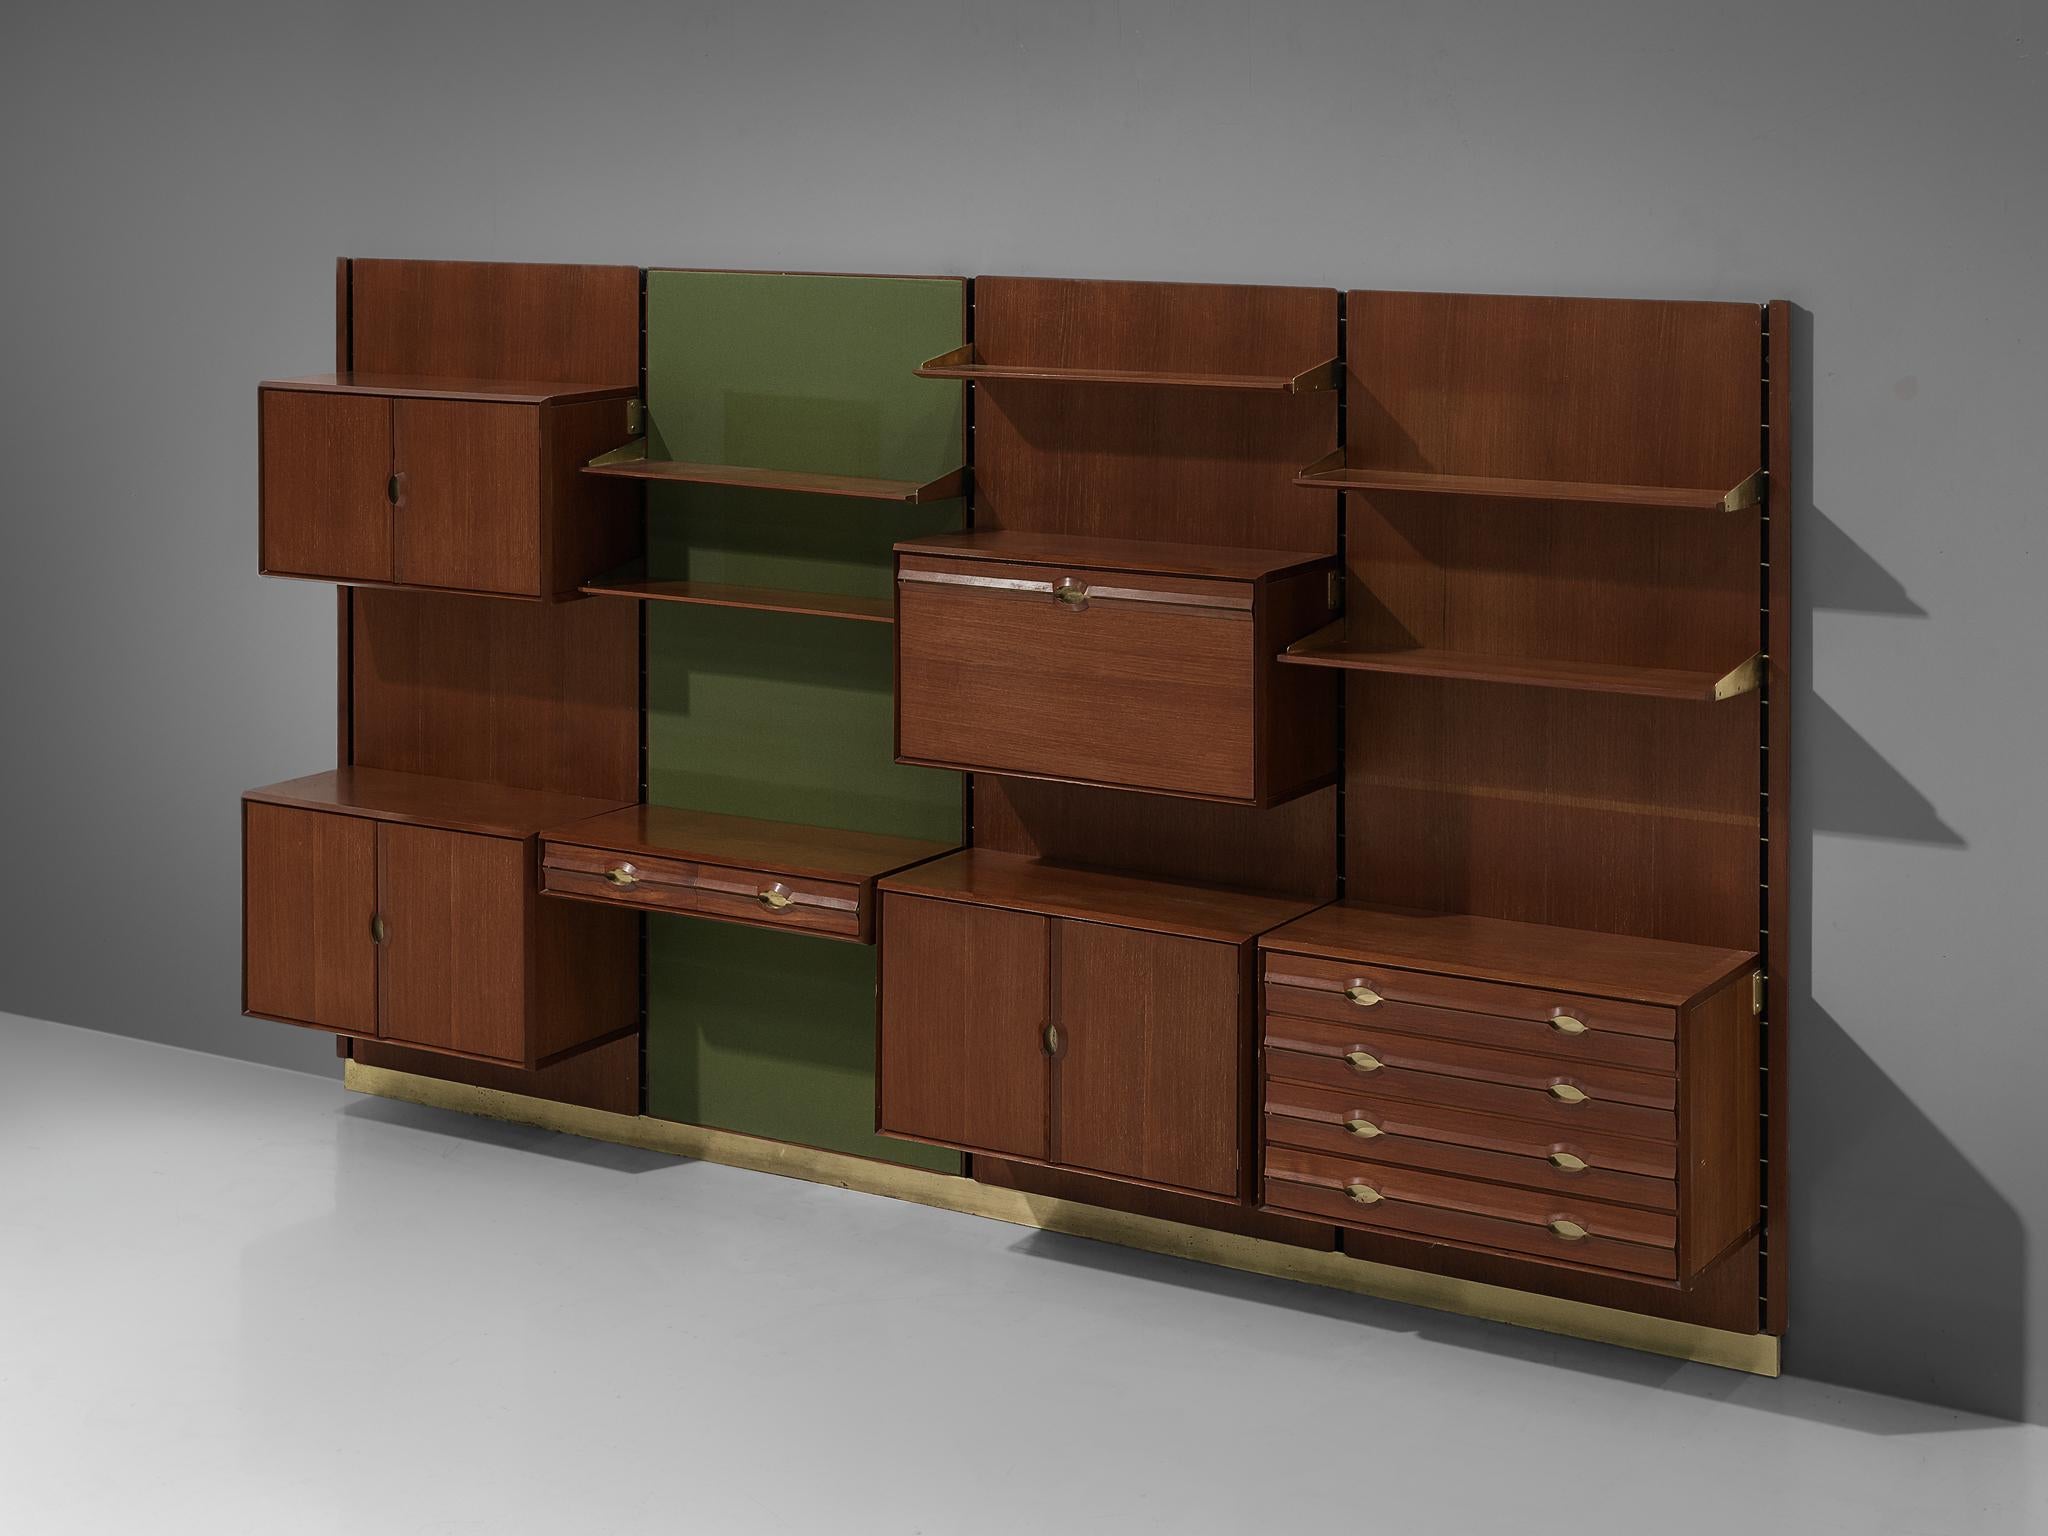 Felt Exquisite Wall Unit by Cantú in Teak